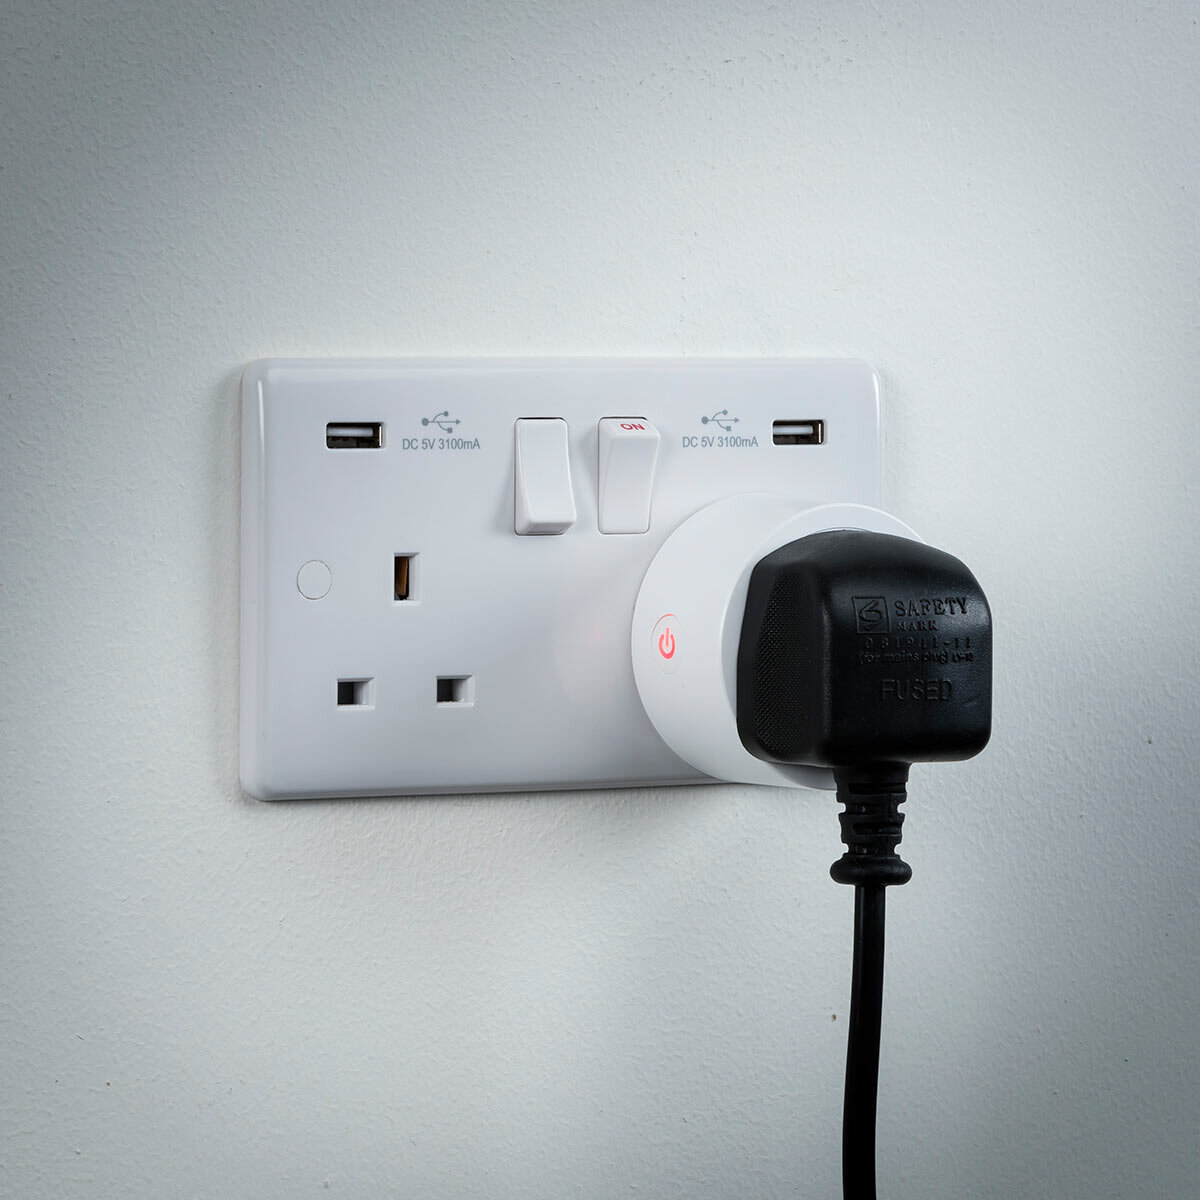 GivEnergy Smart Plug - works with Alexa or Giv App - from